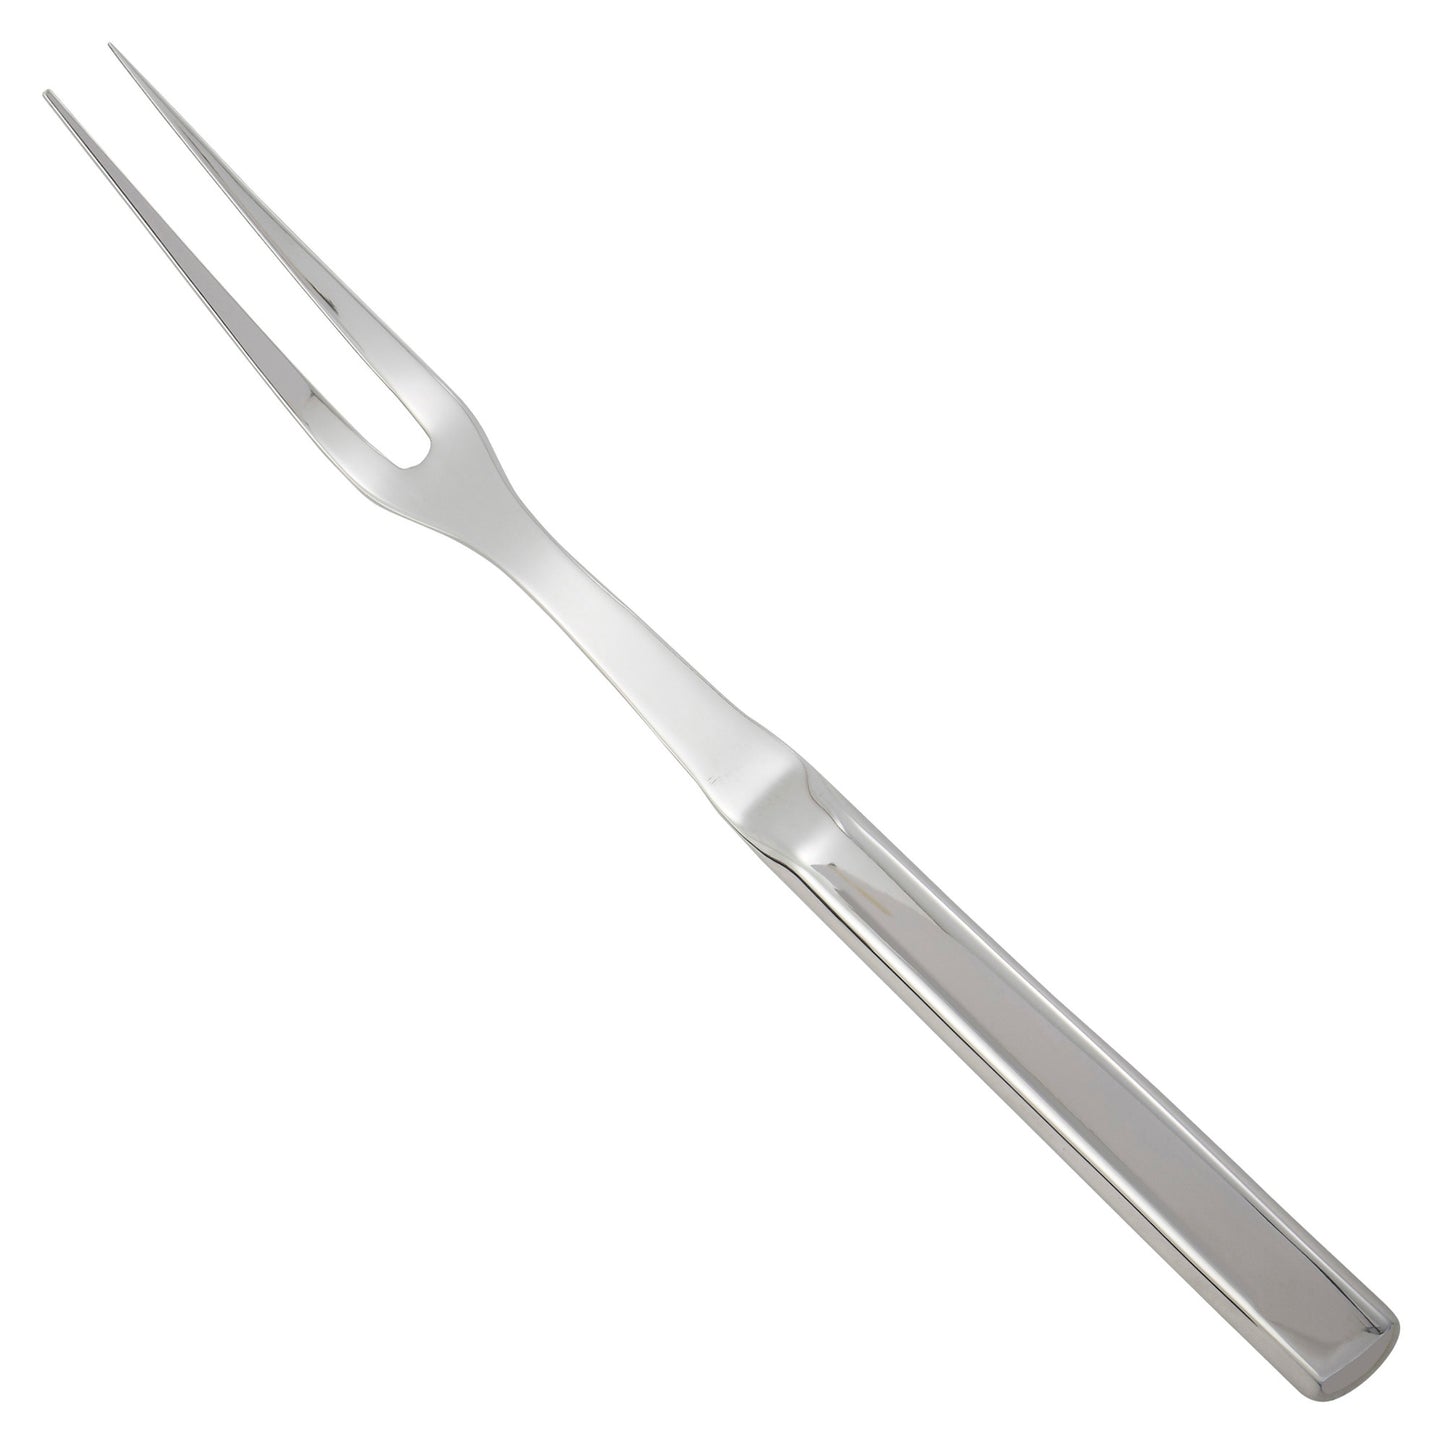 BW-BF - 11" Pot Fork, Hollow Handle, Stainless Steel